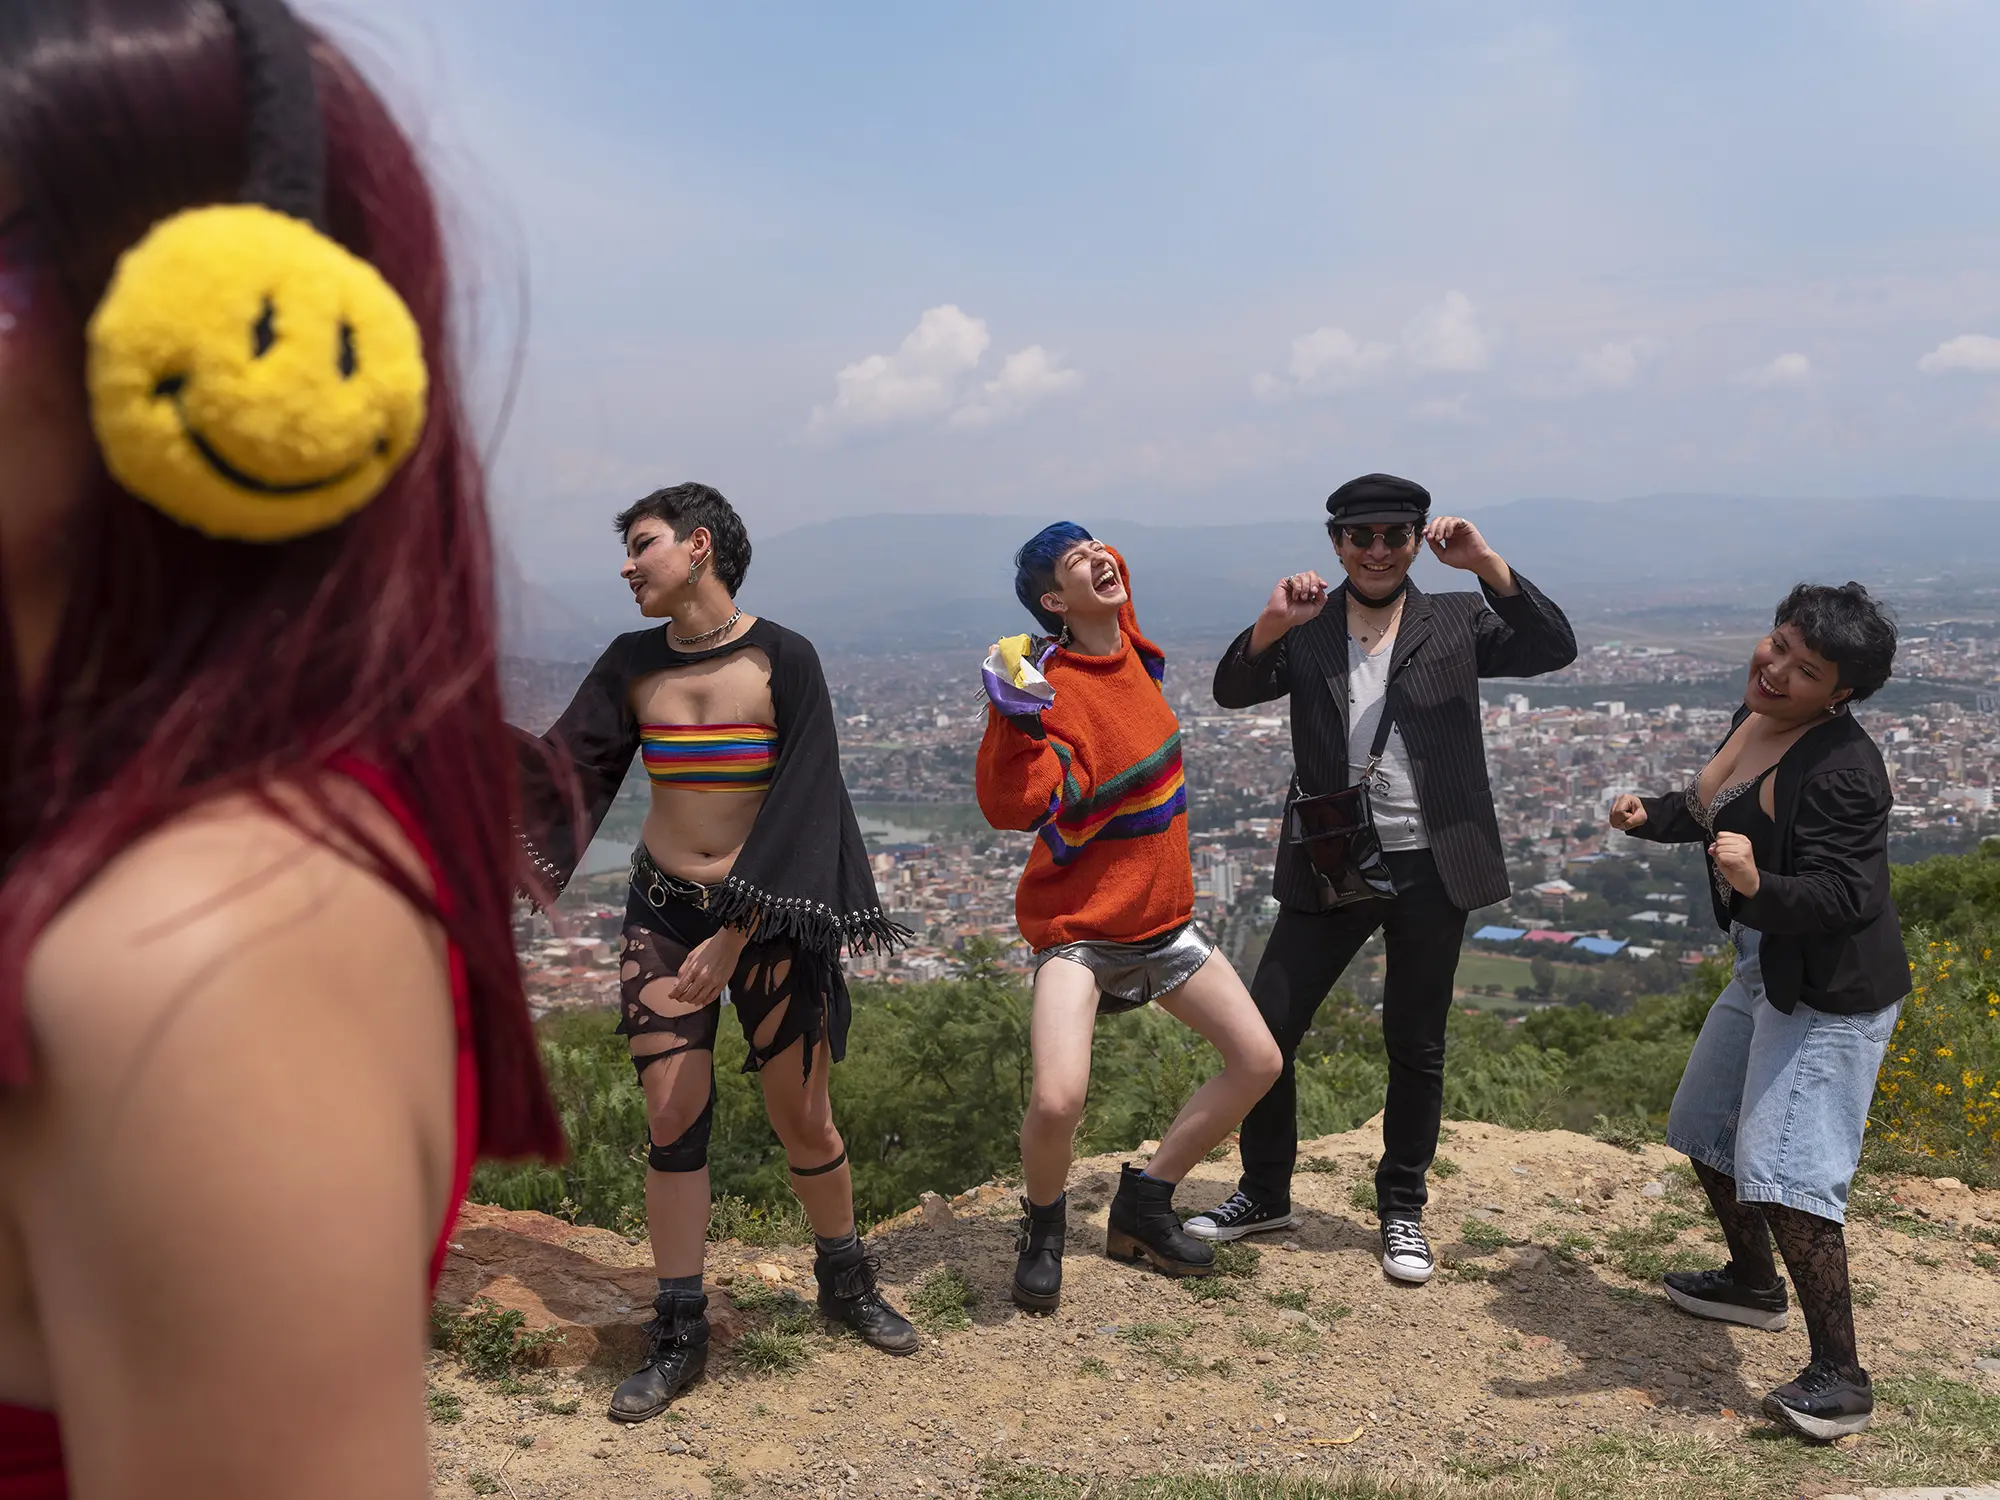 Tam dances on a mountain with other young people